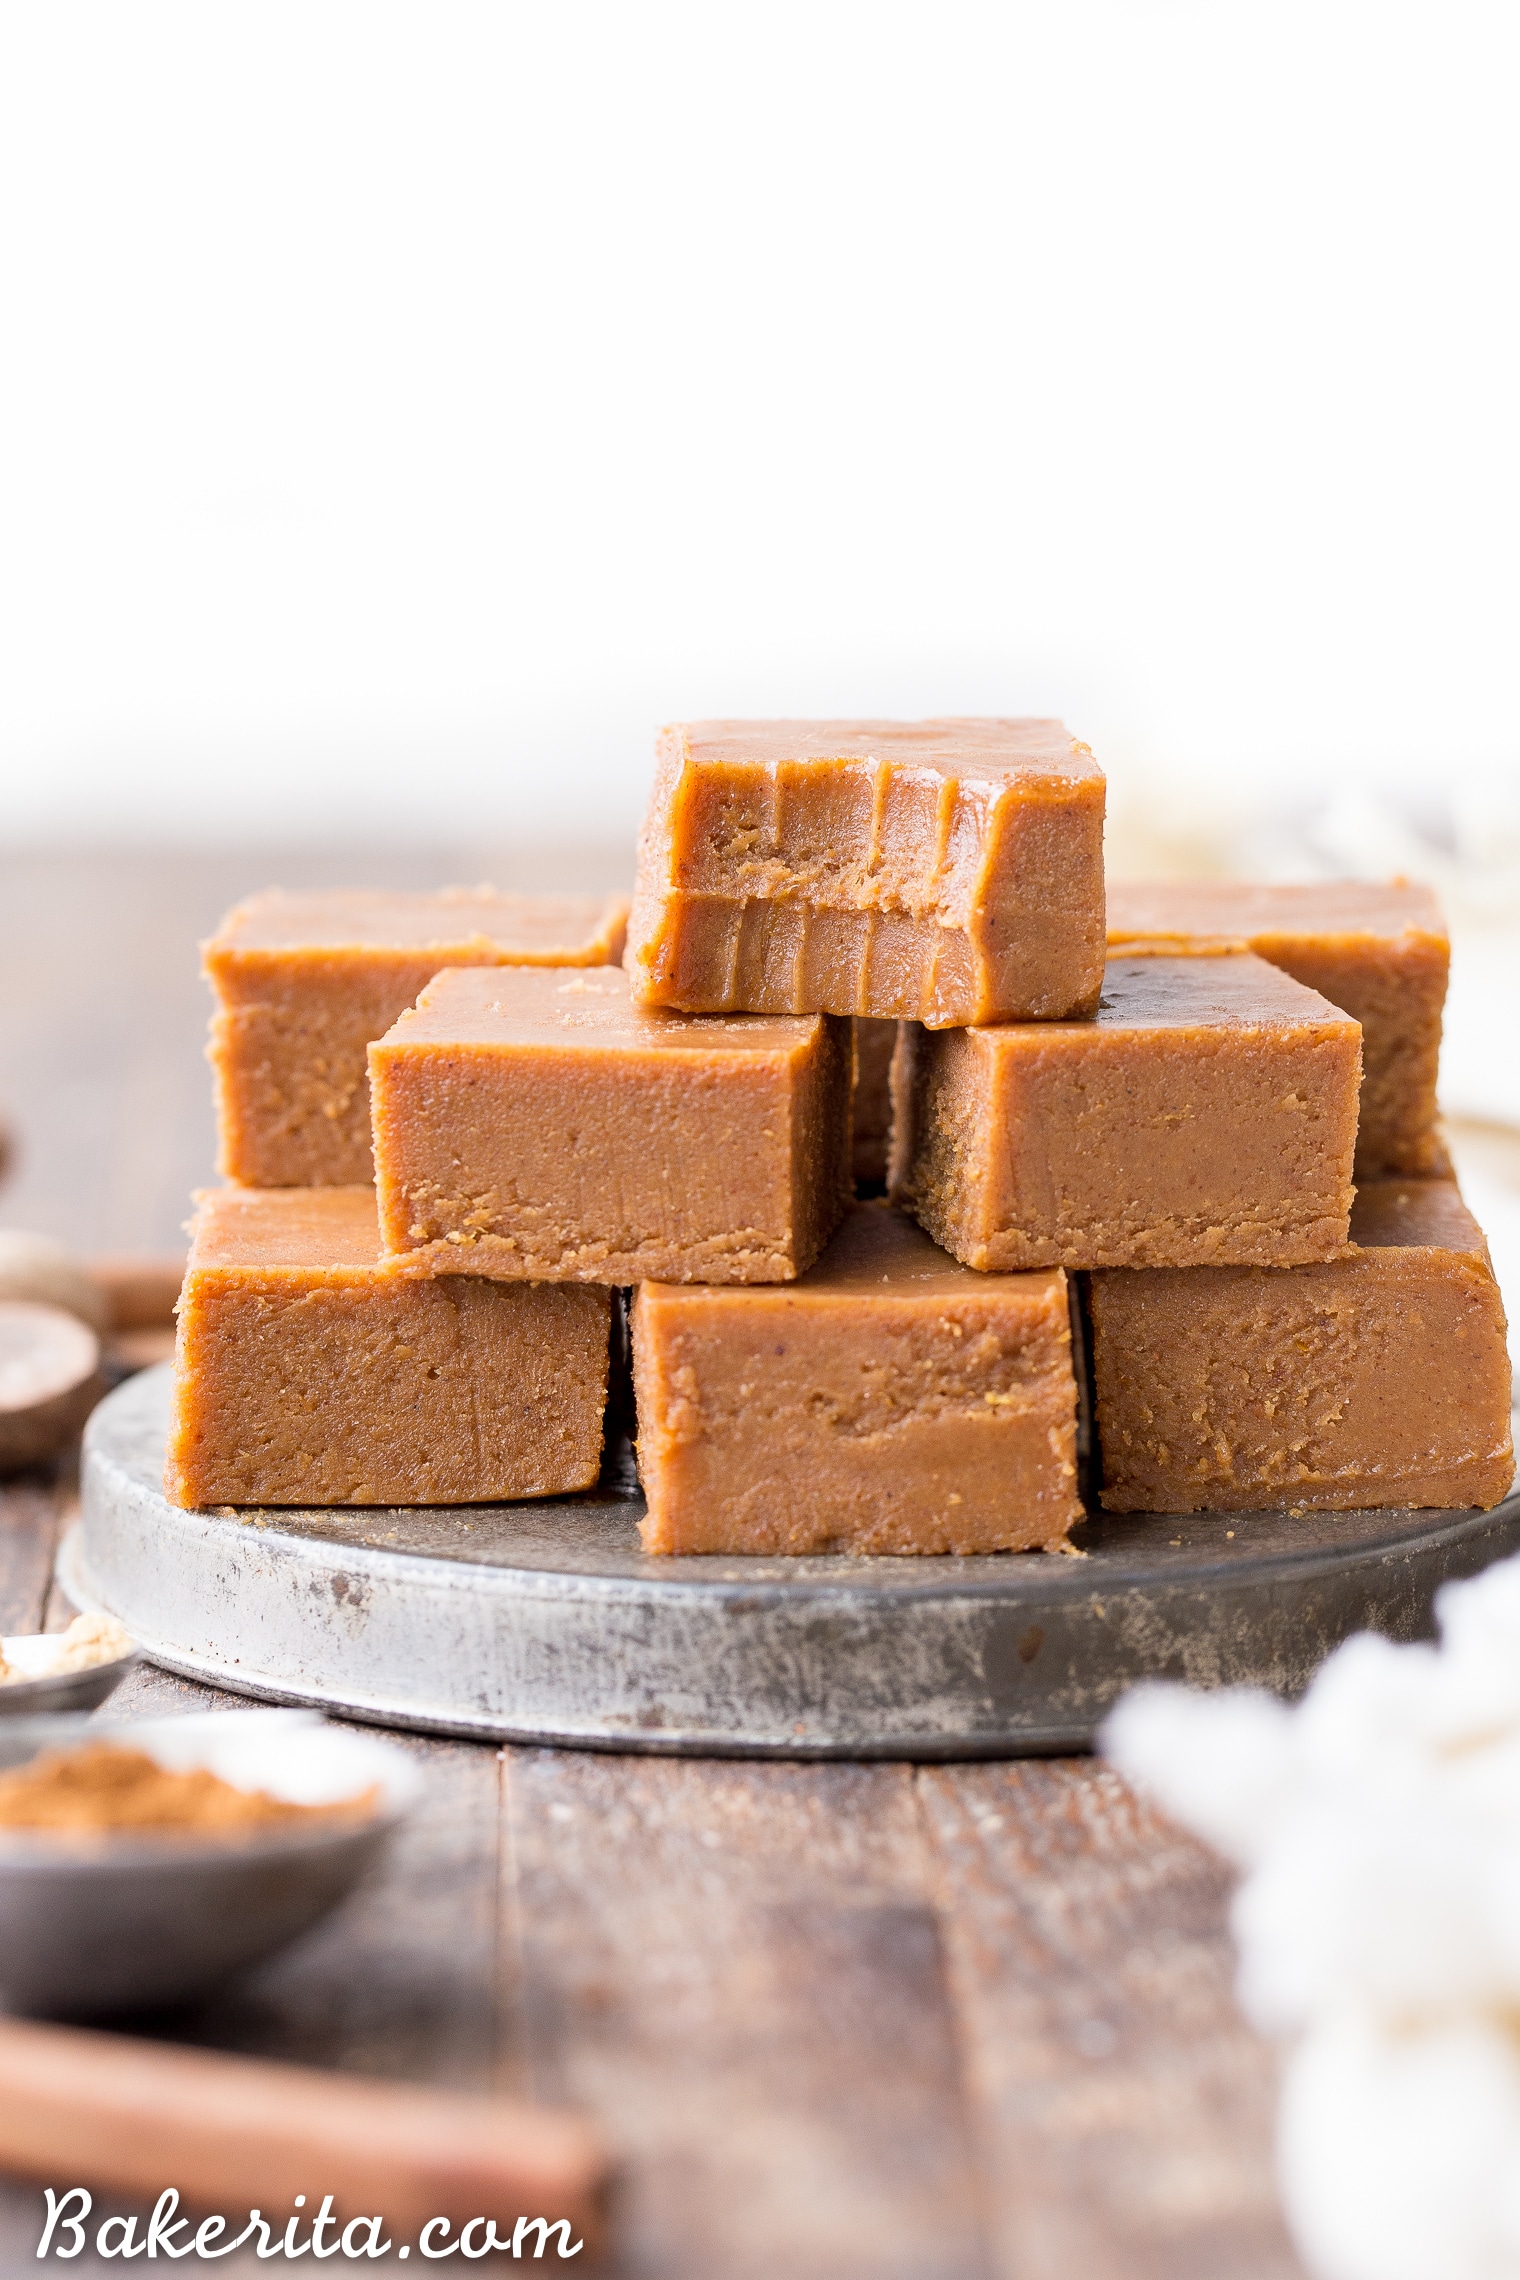 This Raw Vegan Pumpkin Spice Fudge is an easy-to-make, no-cooking-necessary treat that melts in your mouth and tastes like fall! With just five ingredients, this paleo and vegan homemade fudge couldn't be easier to make.